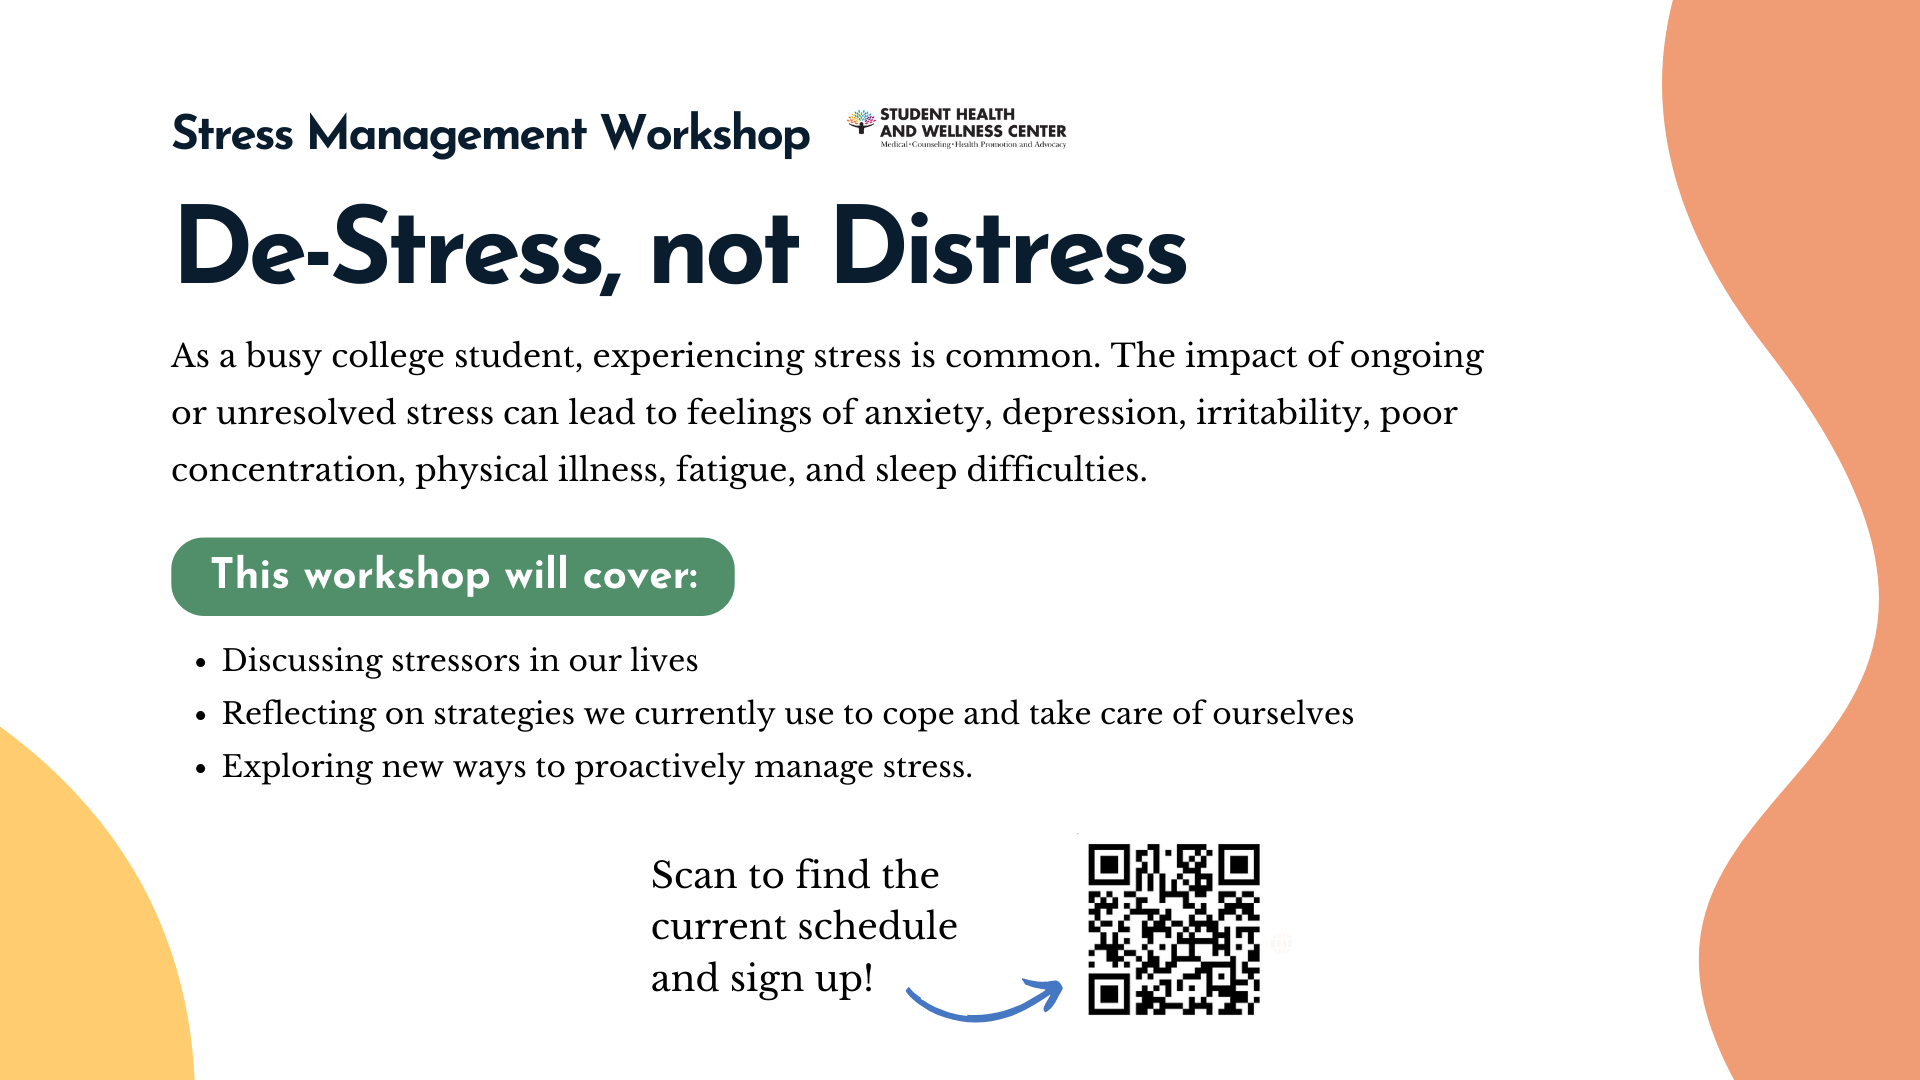 An event for learning de-stressing ideas and mechanisms